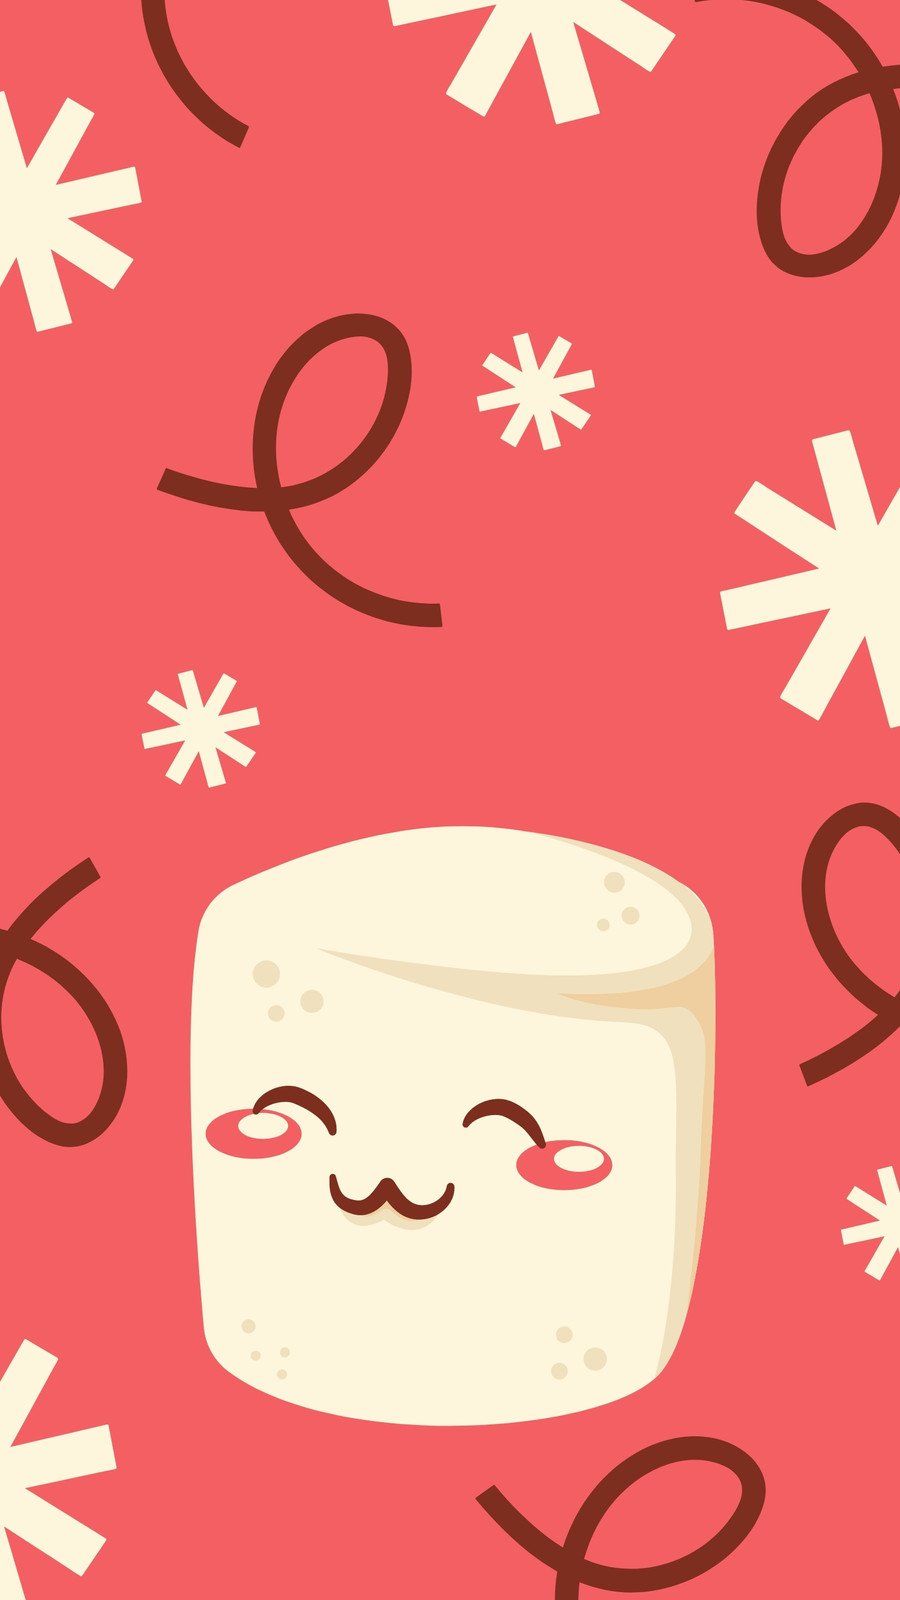 A cute cartoon character is sitting on top of some white cheese - Marshmallows, illustration